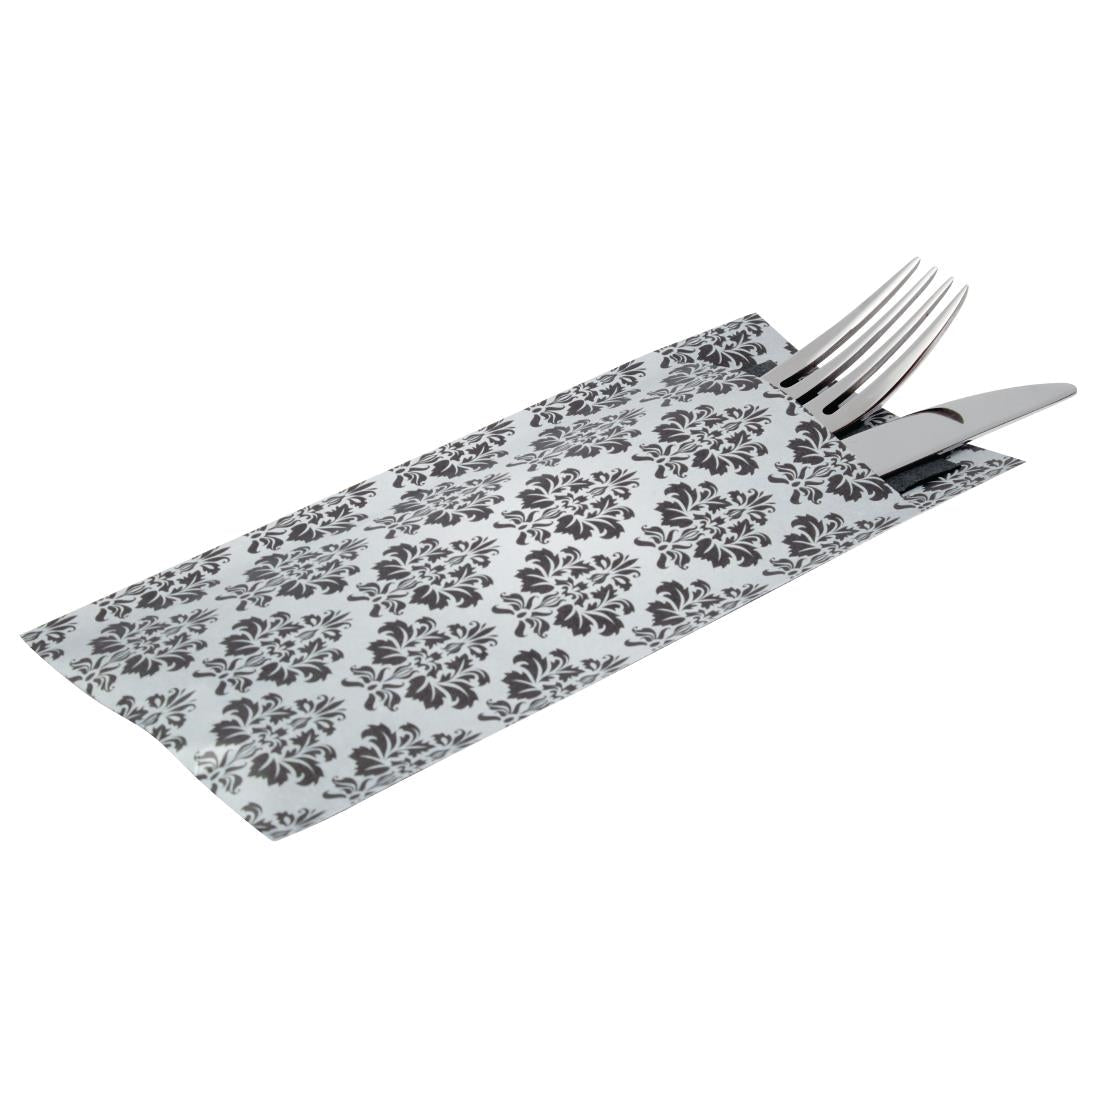 CK238 Europochette White with Vintage Design Cutlery Pouch with Black Napkin (Pack of 100) JD Catering Equipment Solutions Ltd